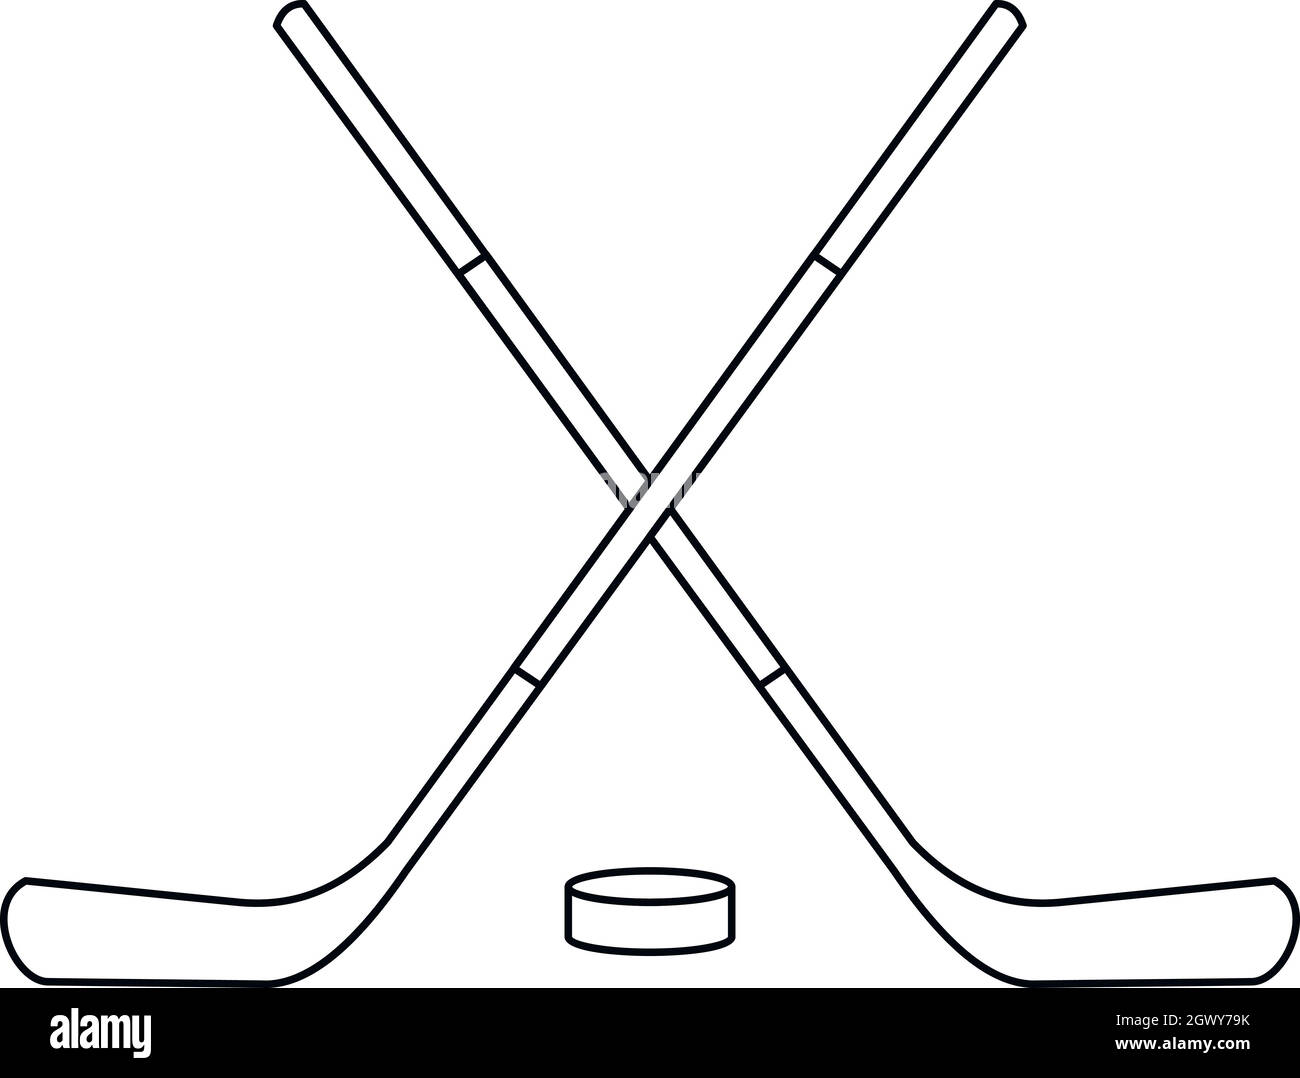 Hockey sticks and puck icon, outline style Stock Vector